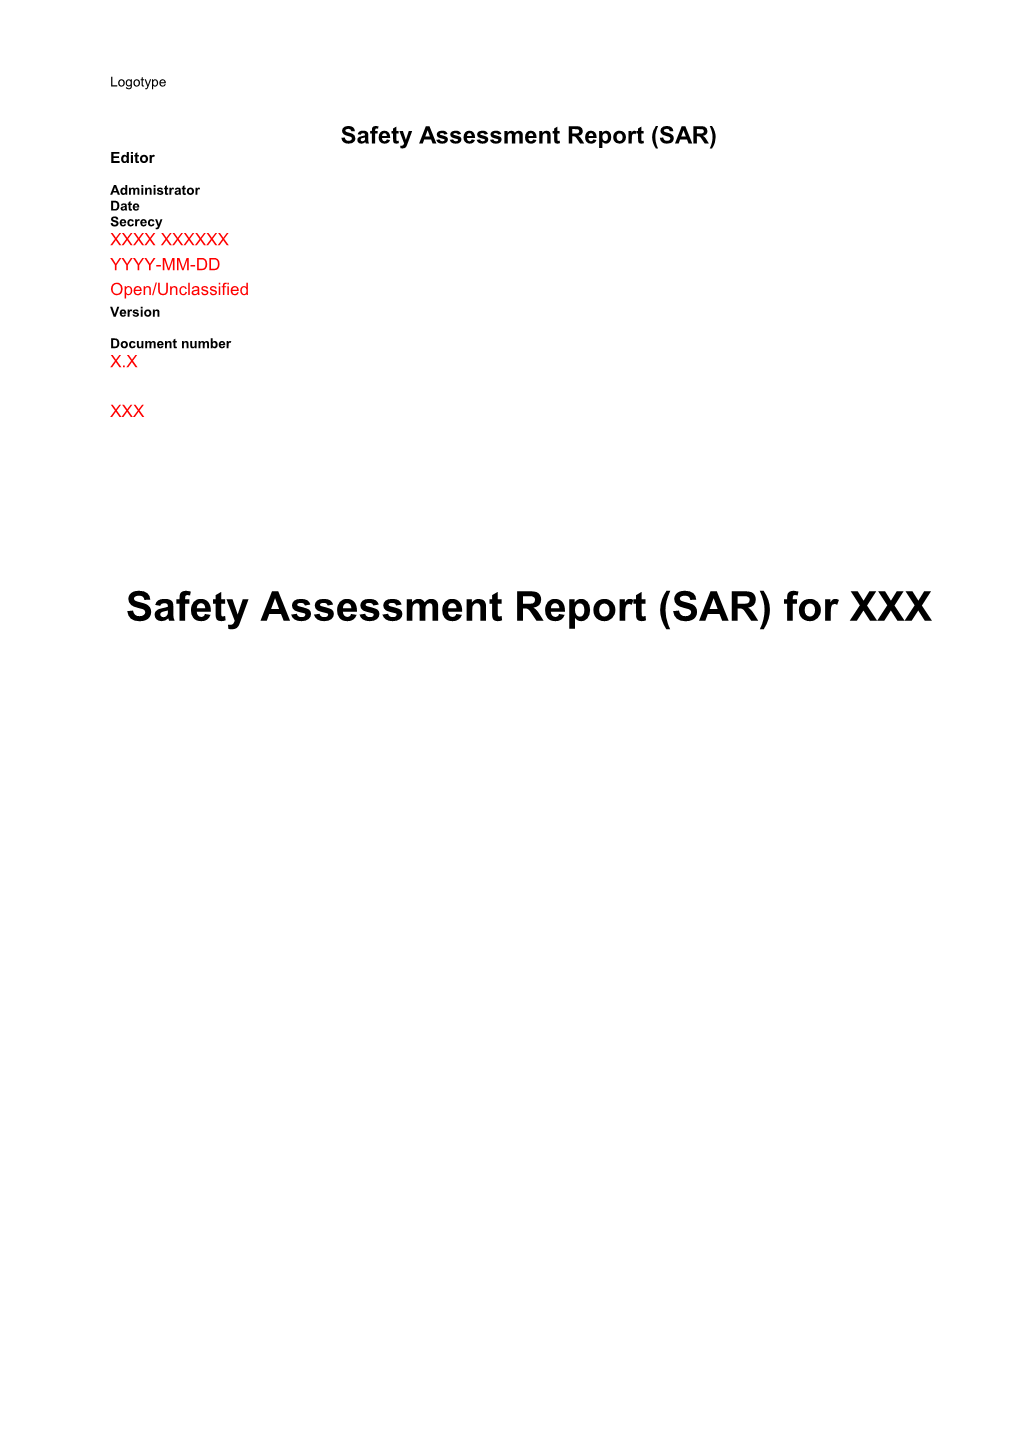 Safety Assessment Report (SAR) for XXX